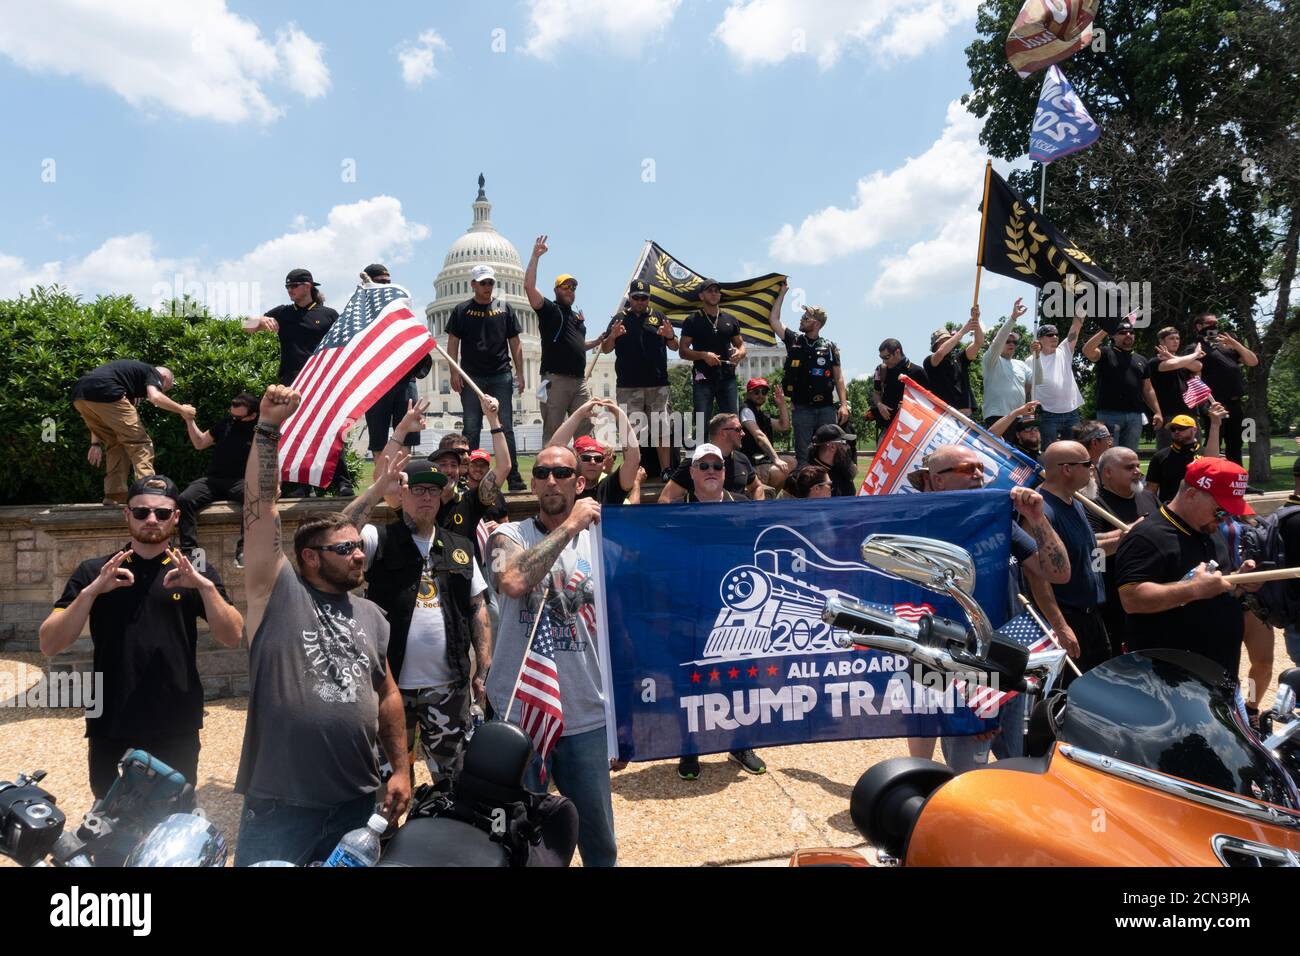 Members of the Proud Boys and a motorcycle group pose for a photo in front of the US Capitol building in Washington DC on 4th July, 2020. Stock Photo